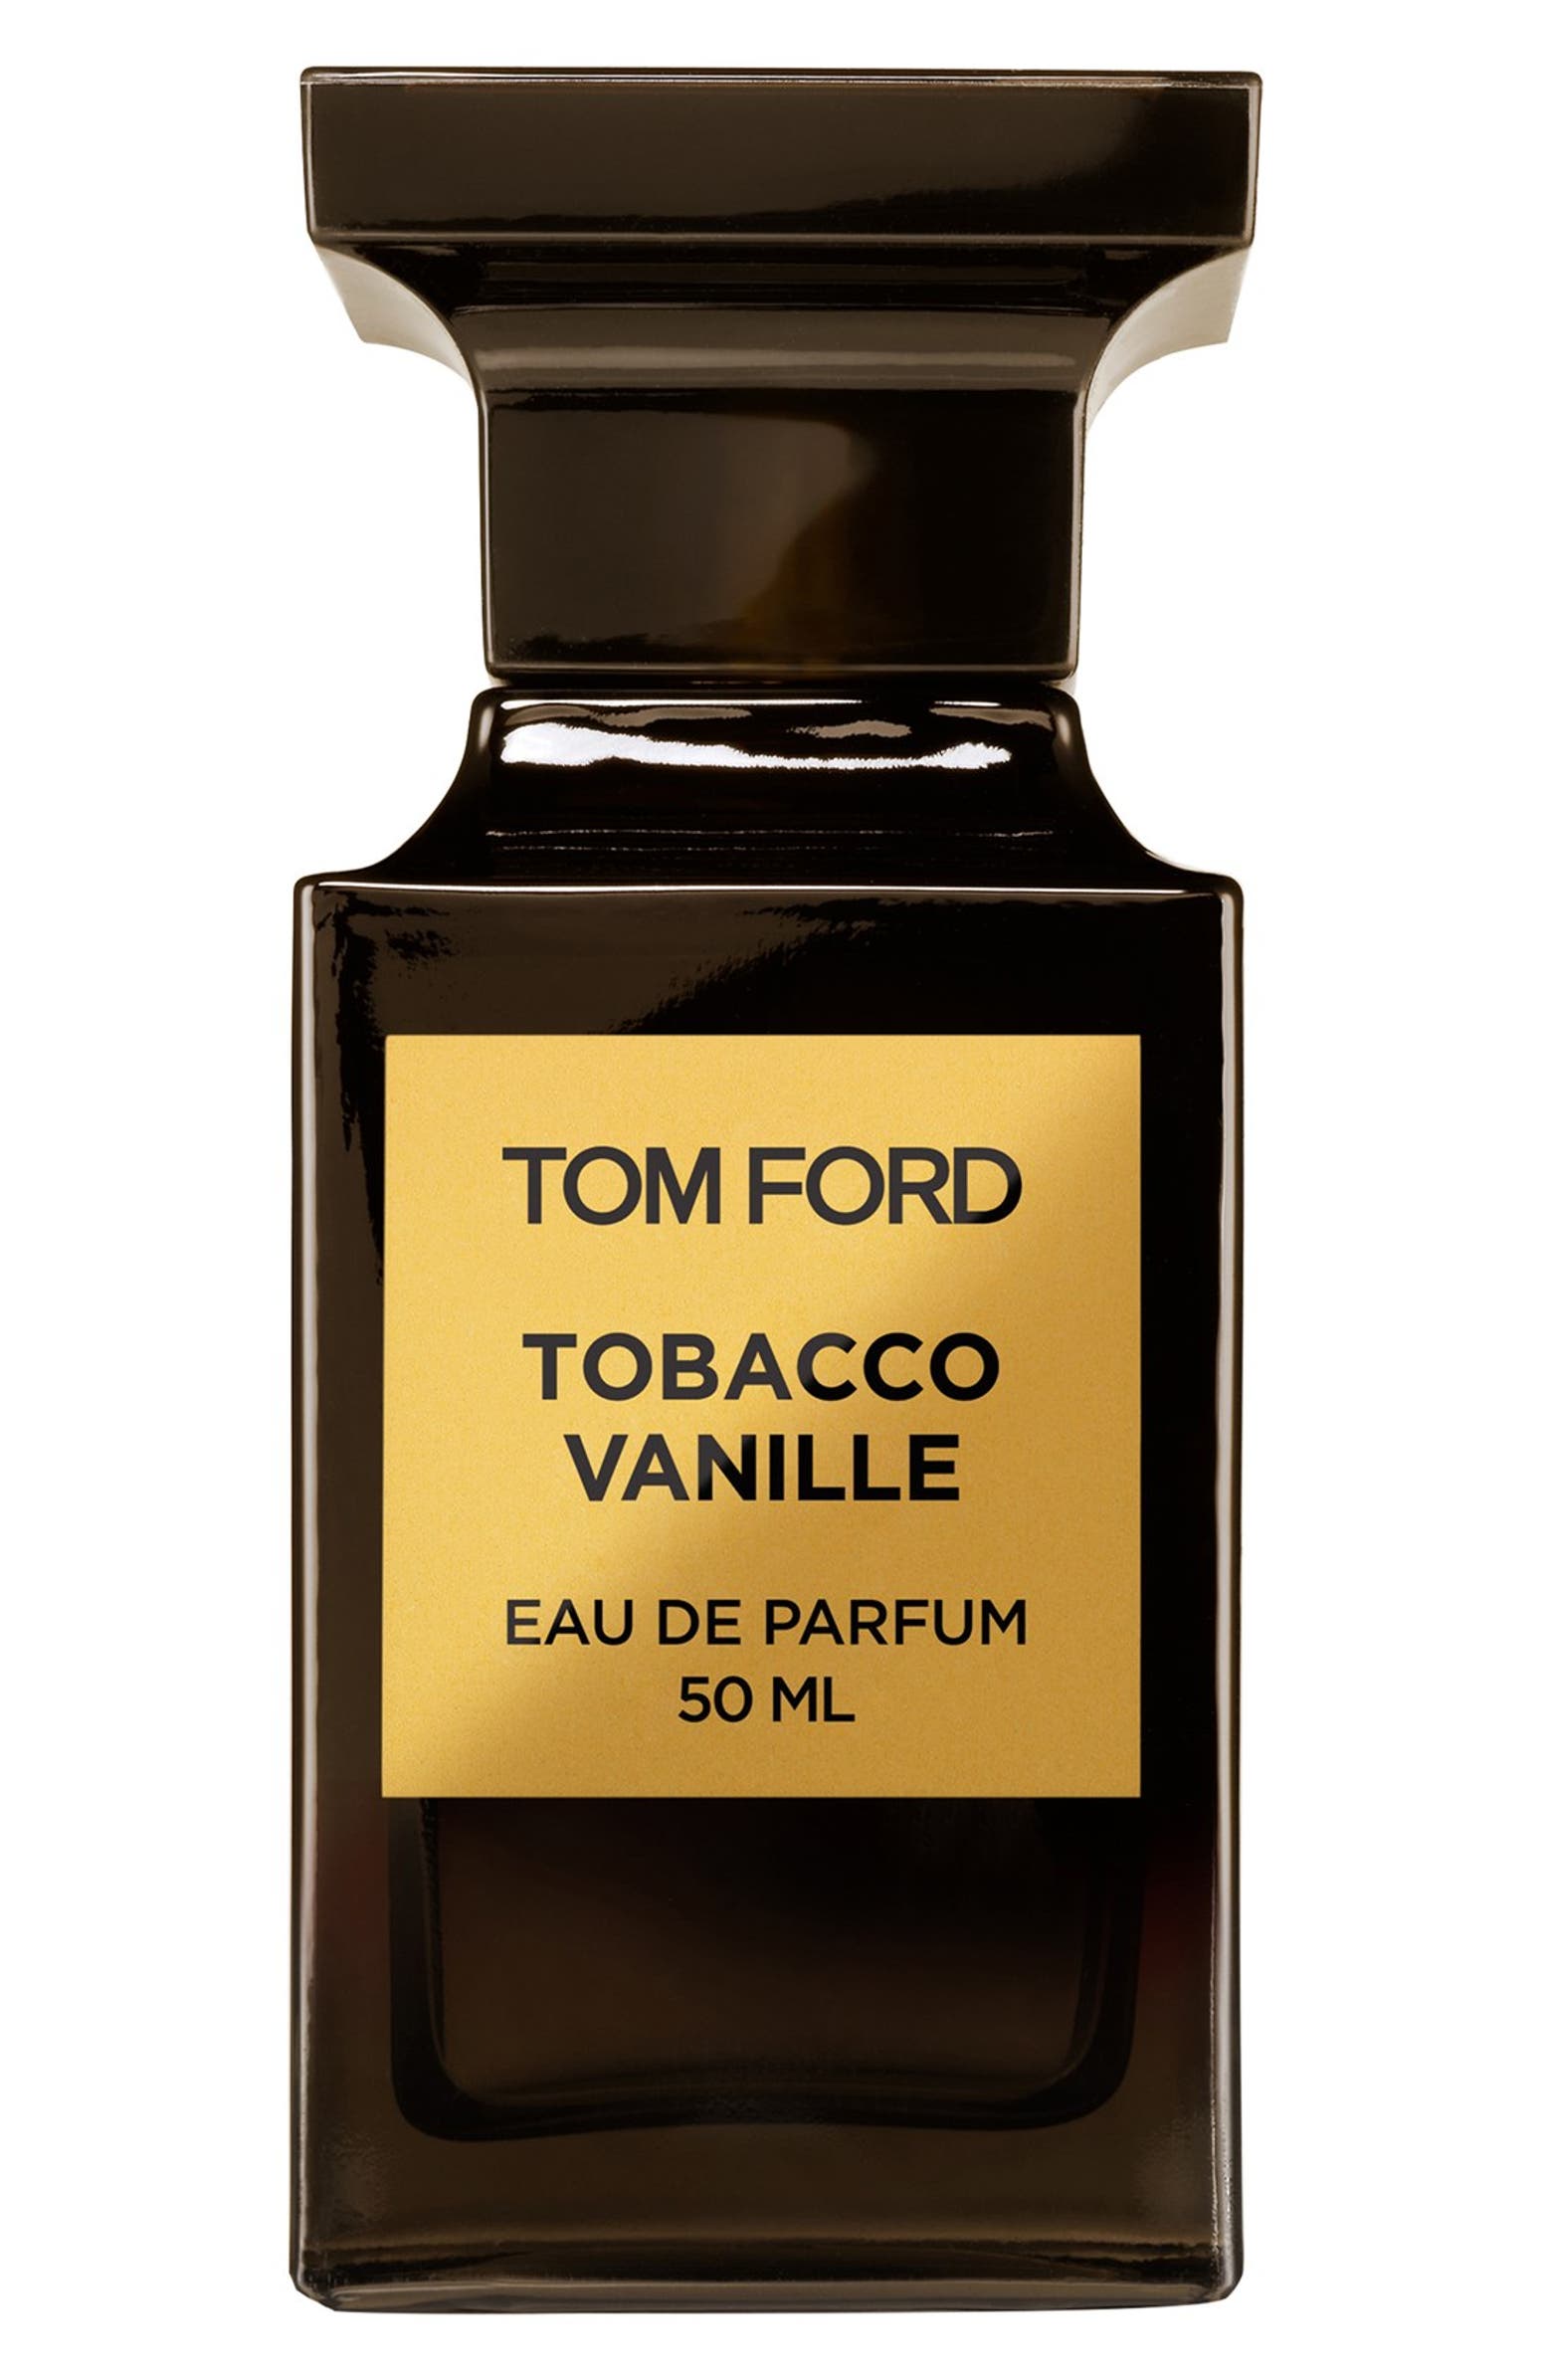 Best gifts for guys with expensive taste: Tom Ford Tobacco Vanille cologne